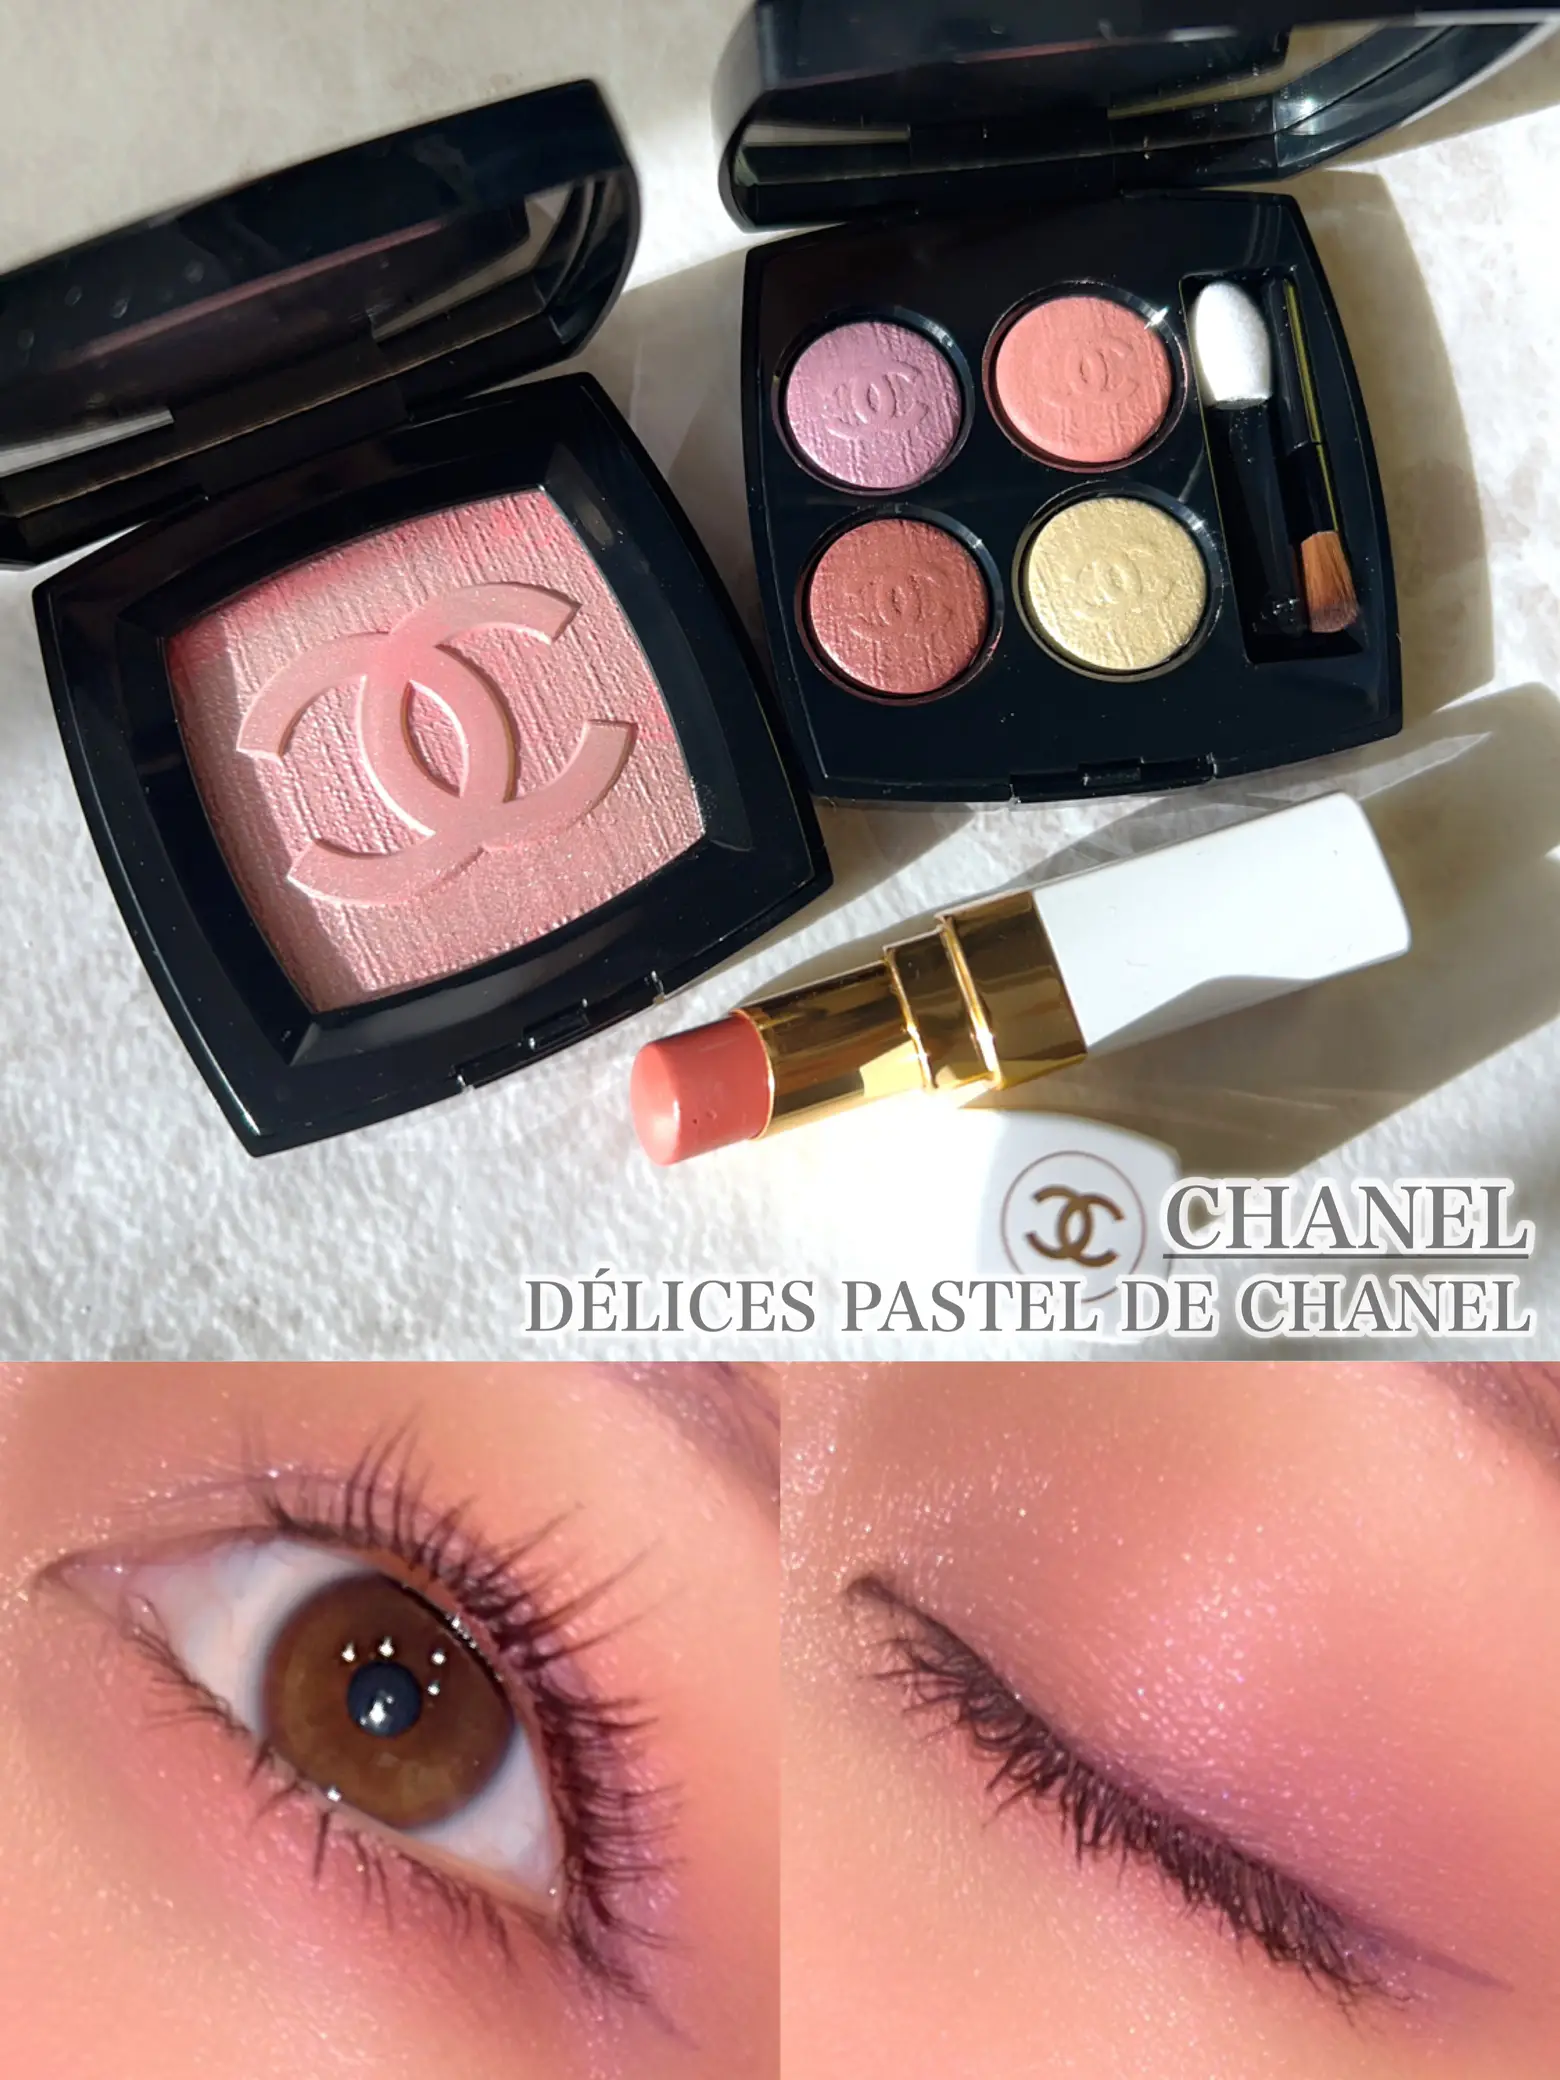 CHANEL Spring Cosmetics Soft and transparent makeup🌸